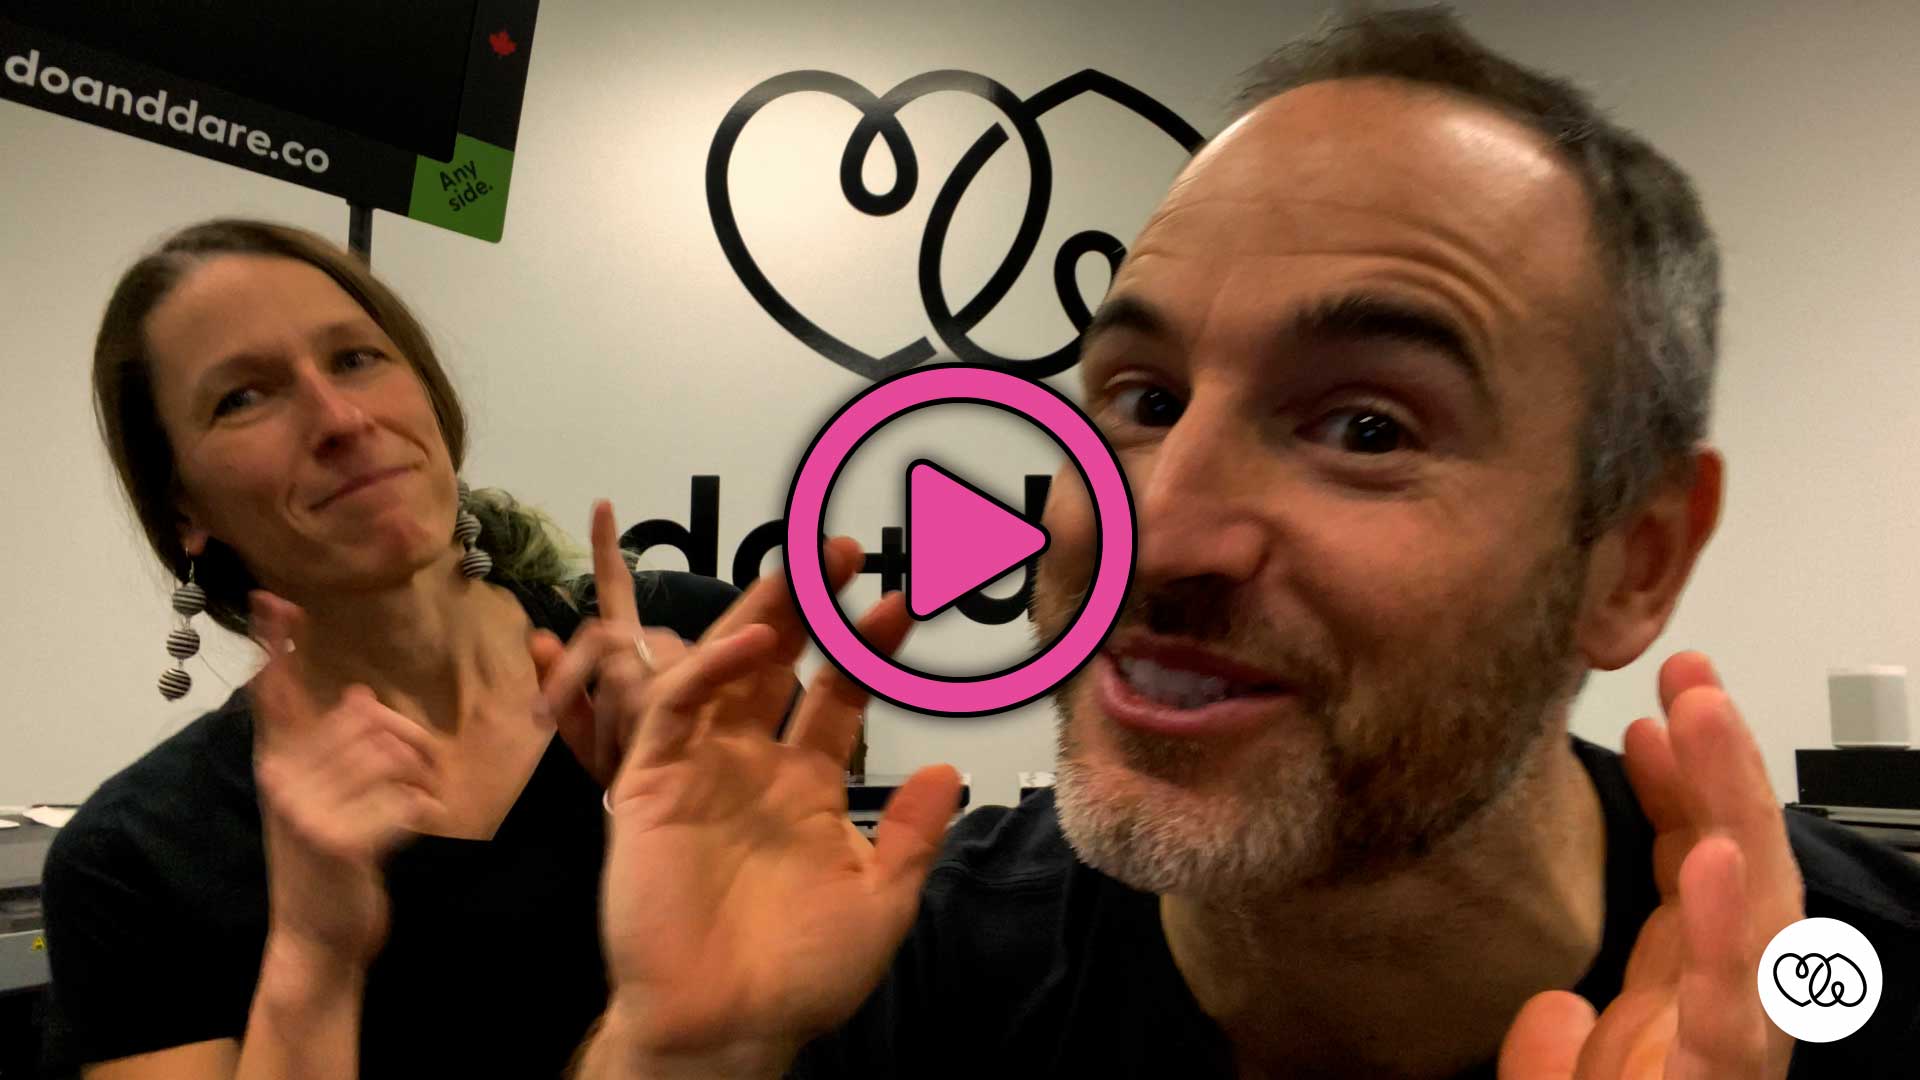 video of Rob + Sarah introducing do+dare undie co.